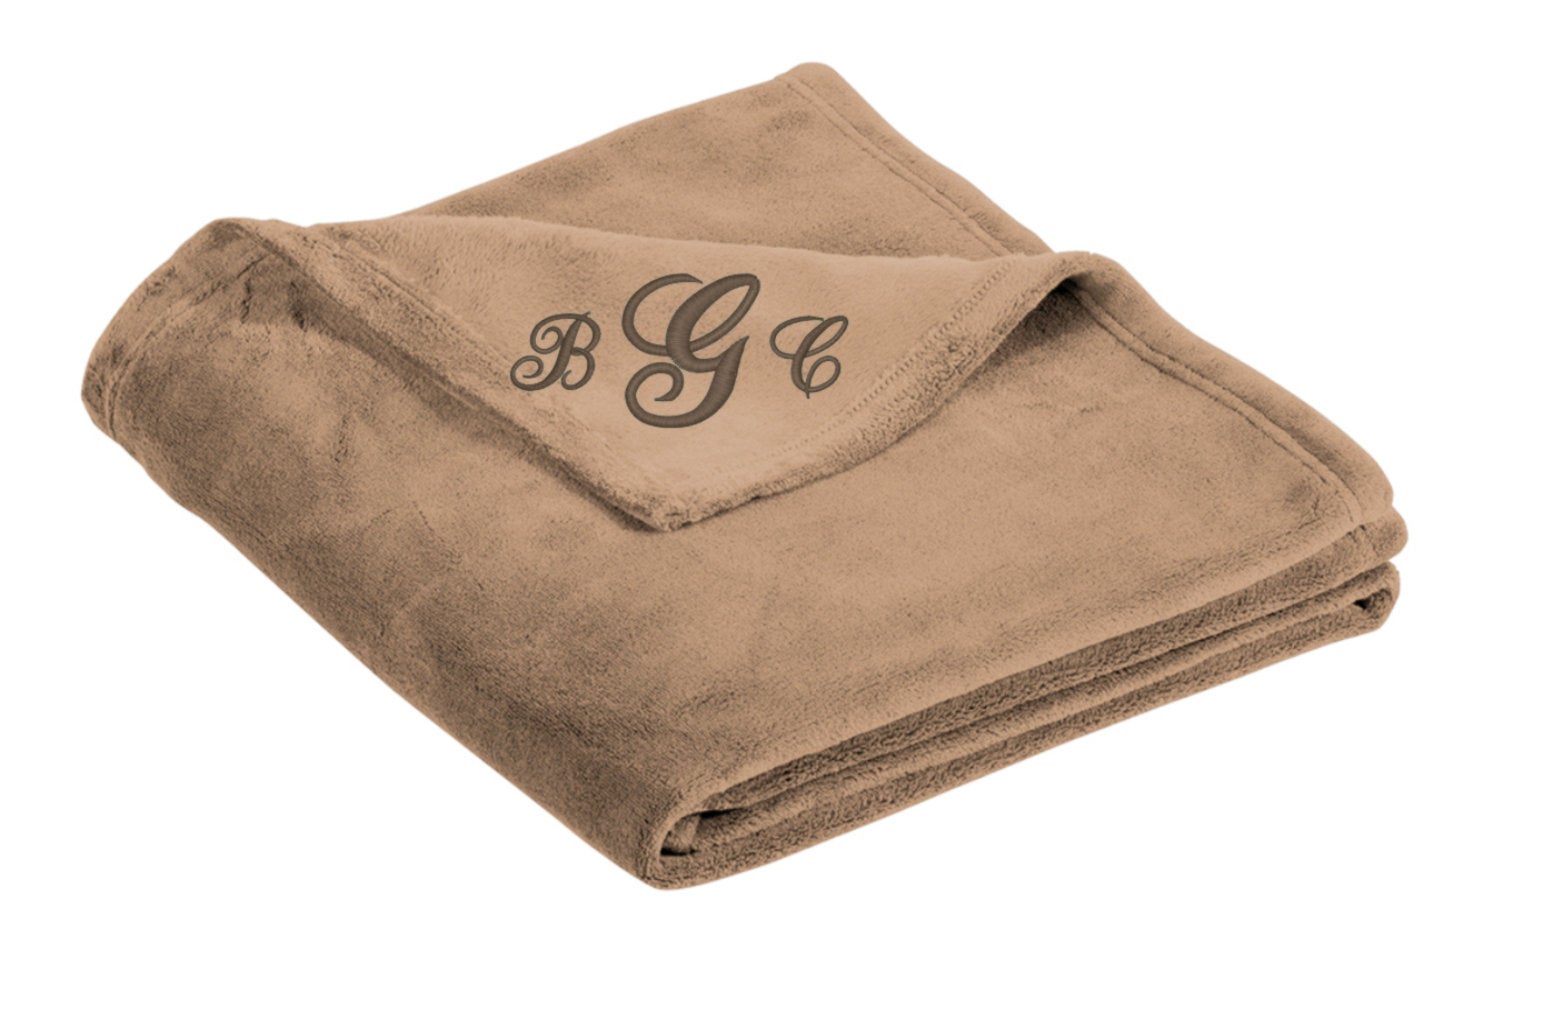 Personalized blanket with initials.